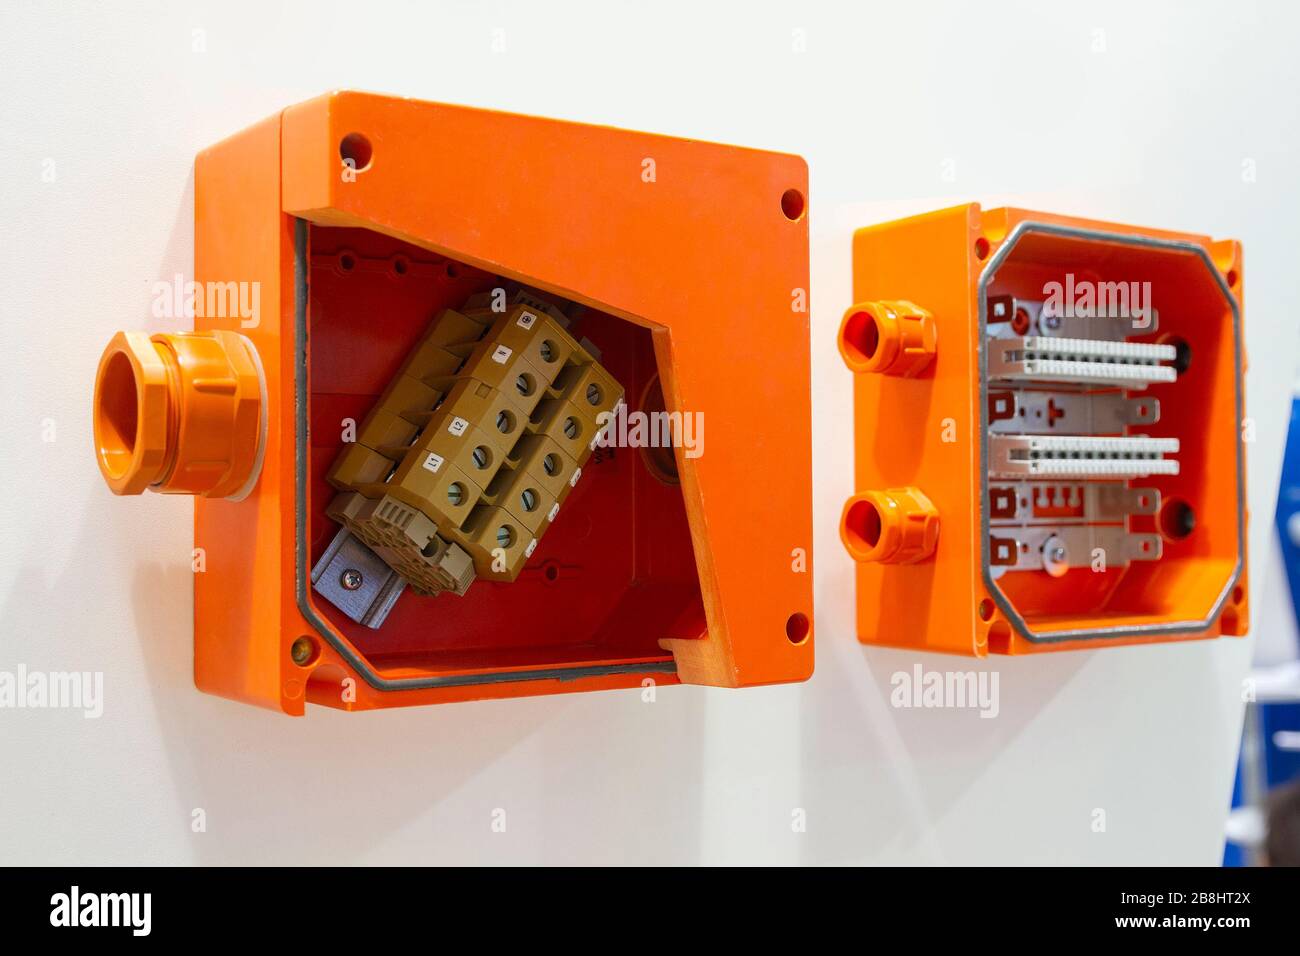 Wires and clam terminals to open the electrical distribution box. Industry Stock Photo